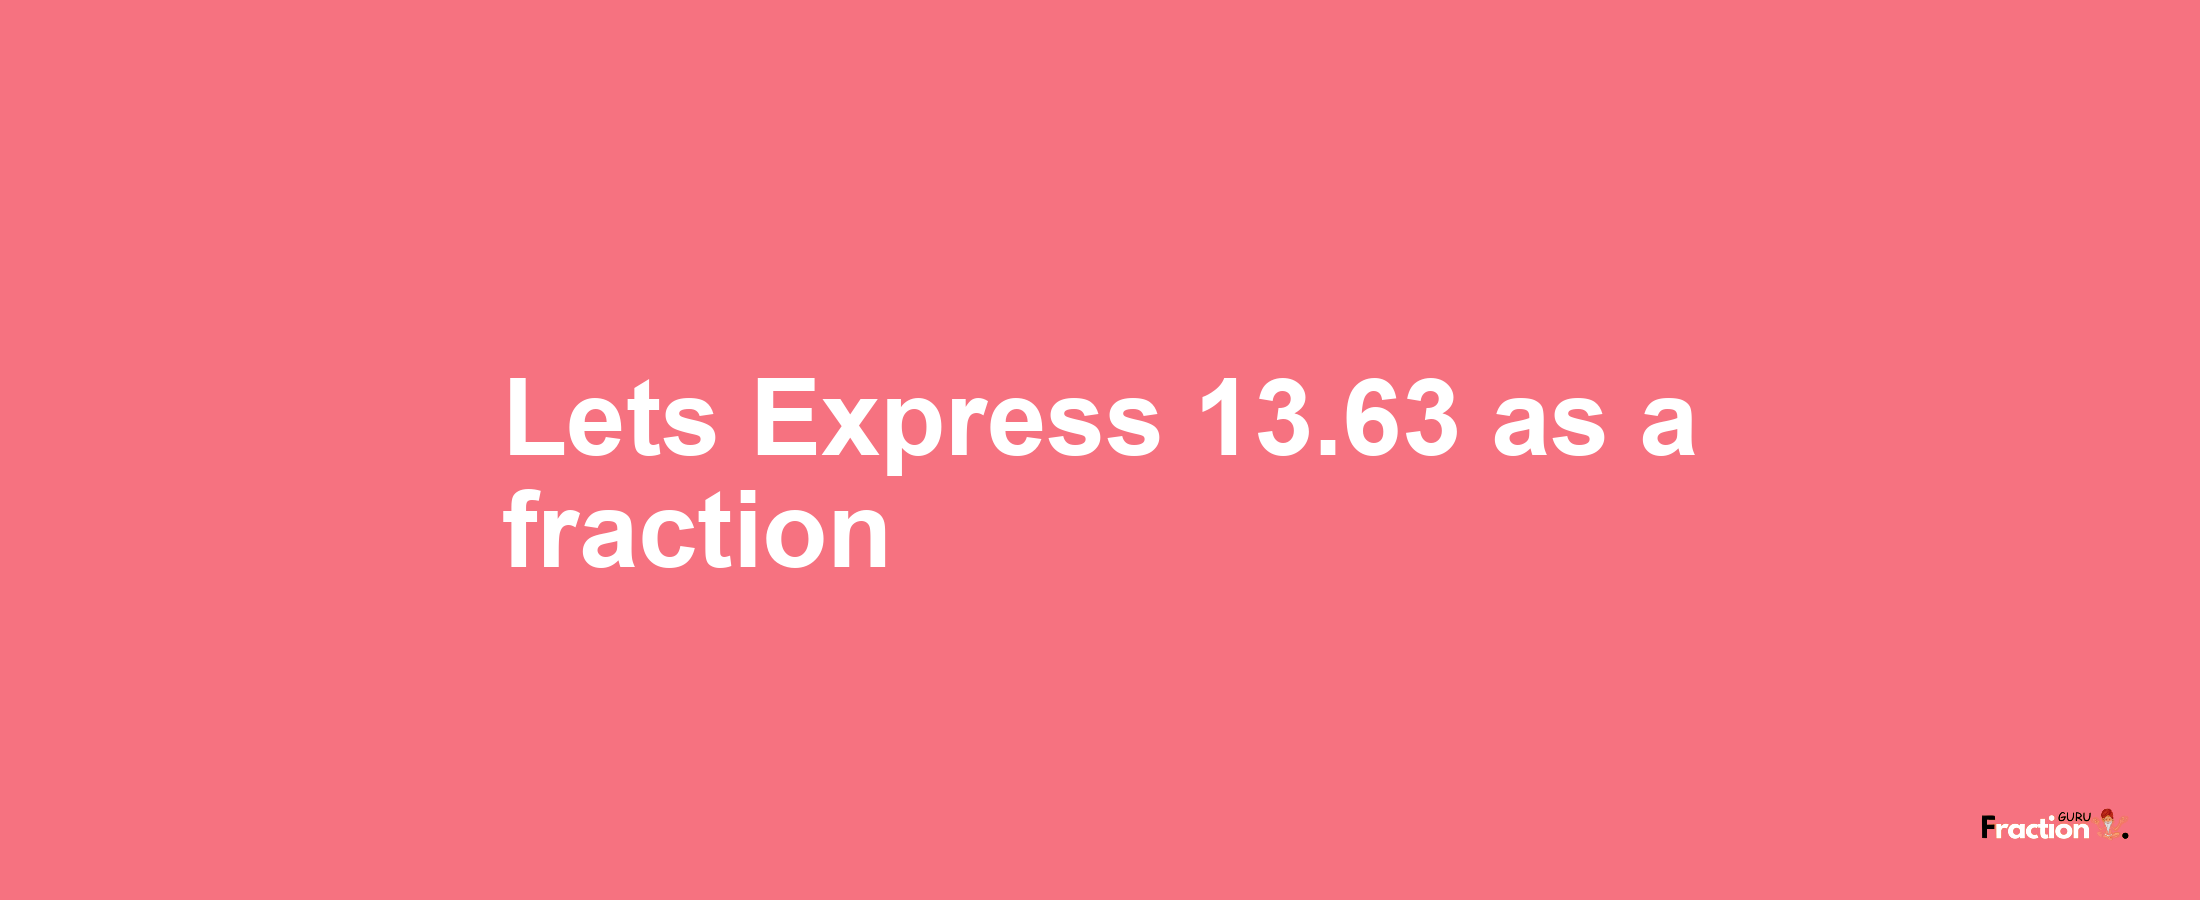 Lets Express 13.63 as afraction